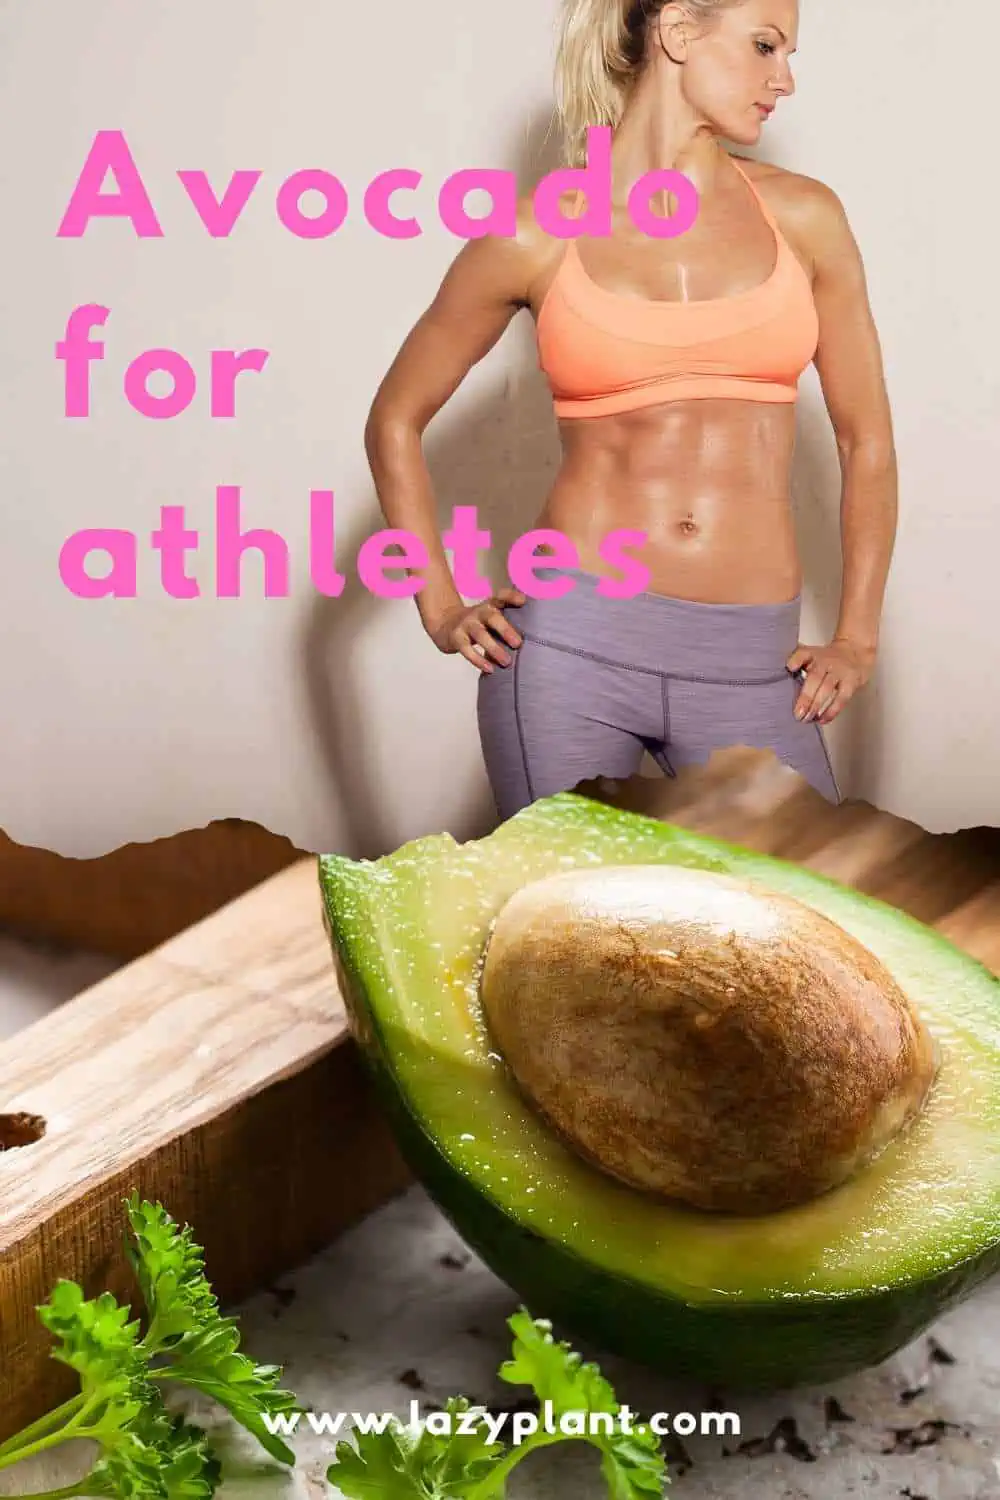 A post-workout avocado sandwich is beneficial for athletes.